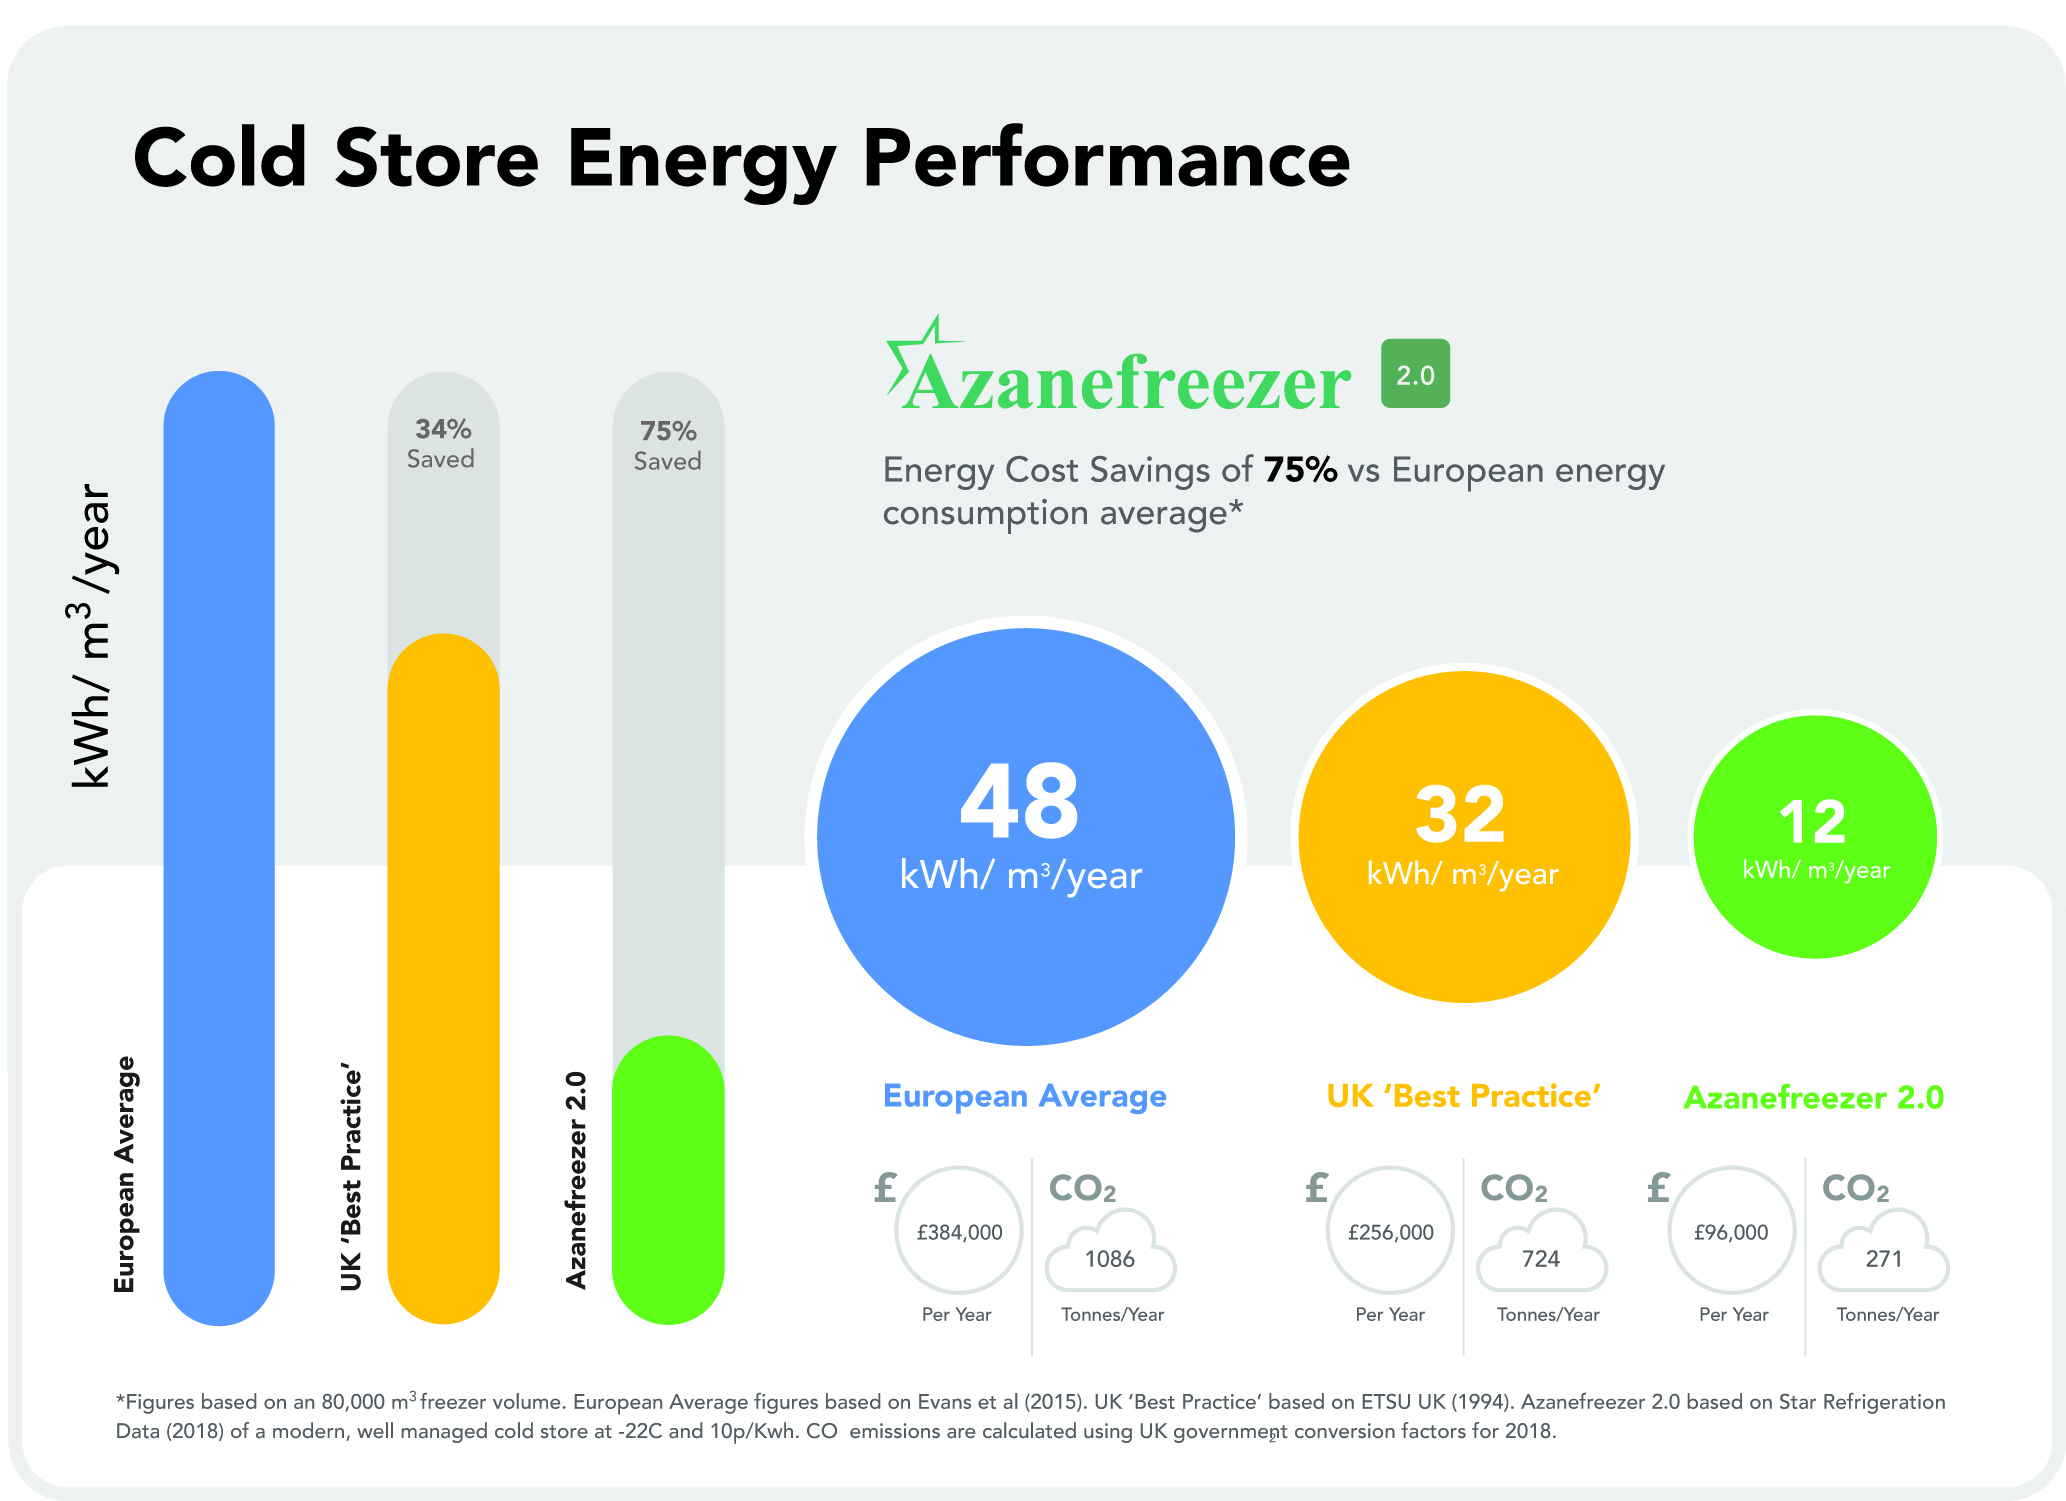 Energy Performace of the Azanefreezer 2.0 vs refrigeration industry standard